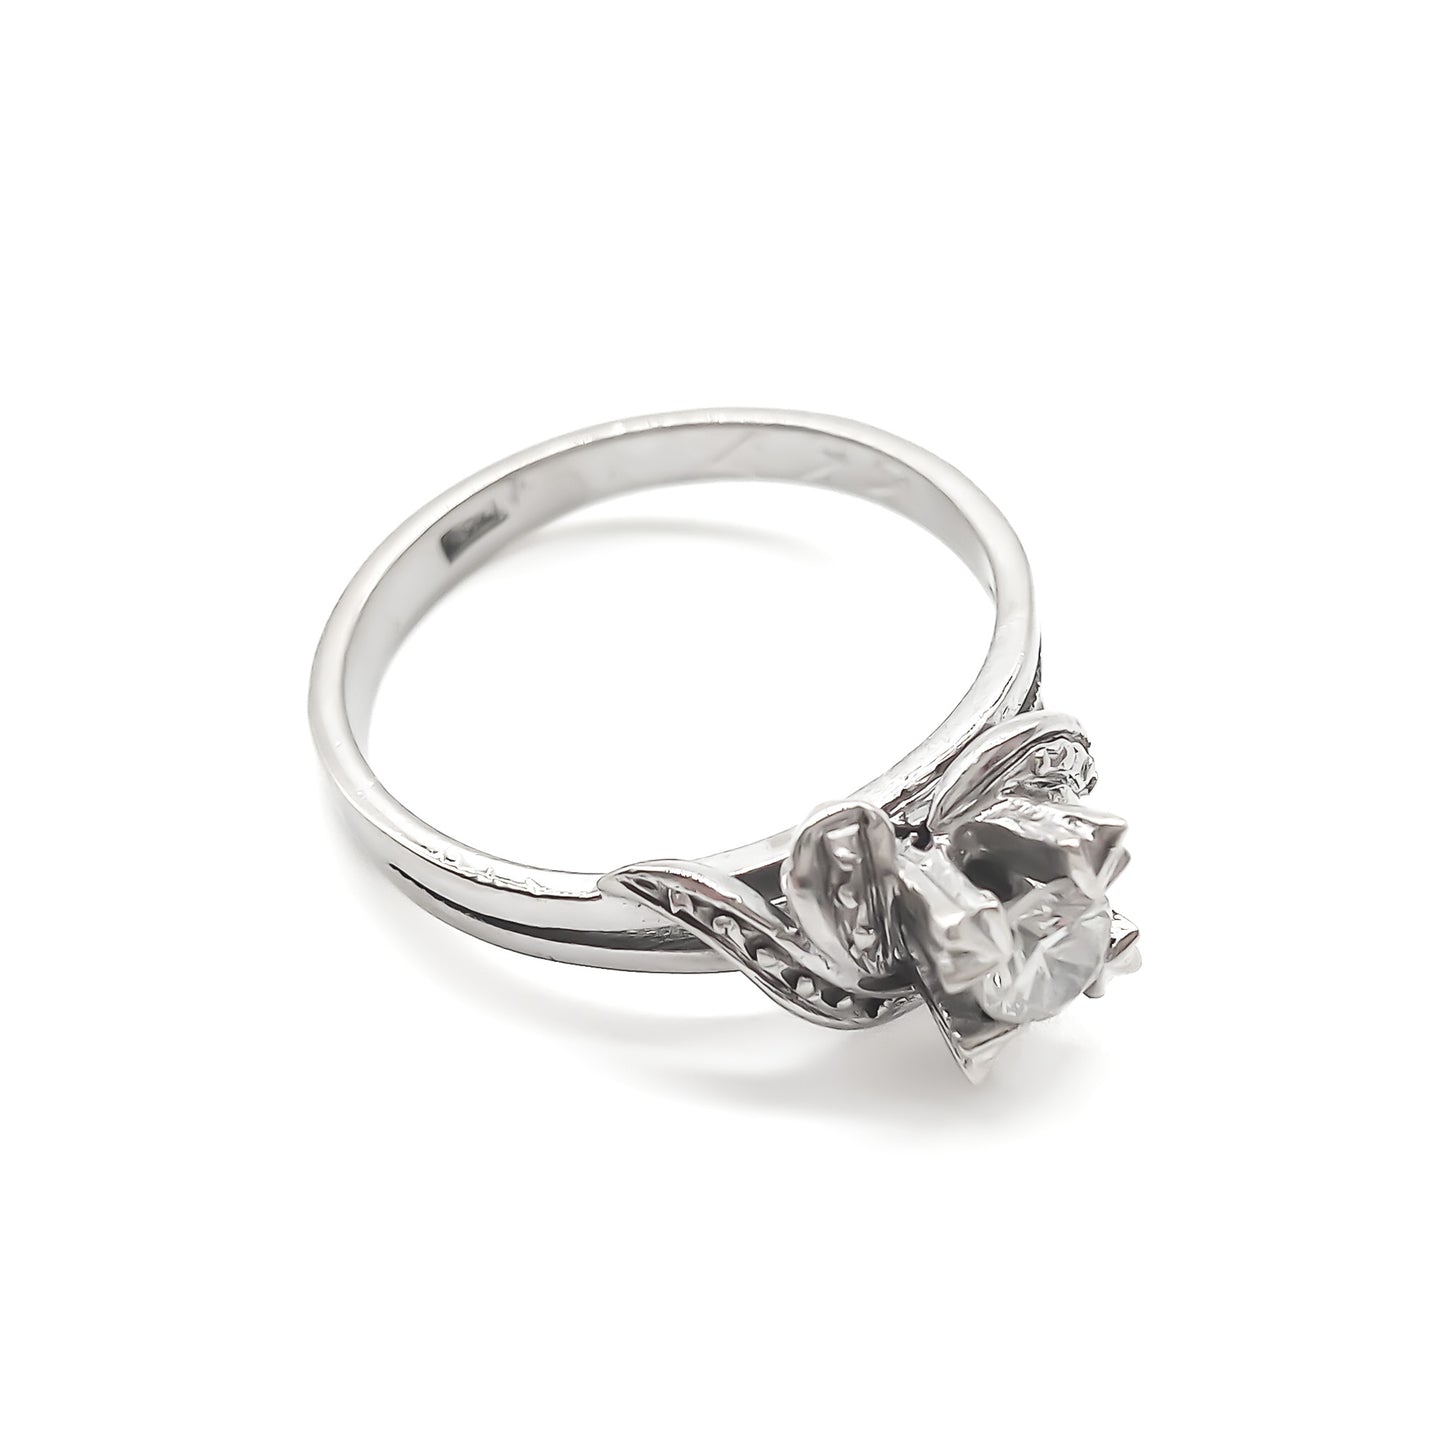  Classic 18ct white gold solitaire diamond ring with lovely flourish detail. 